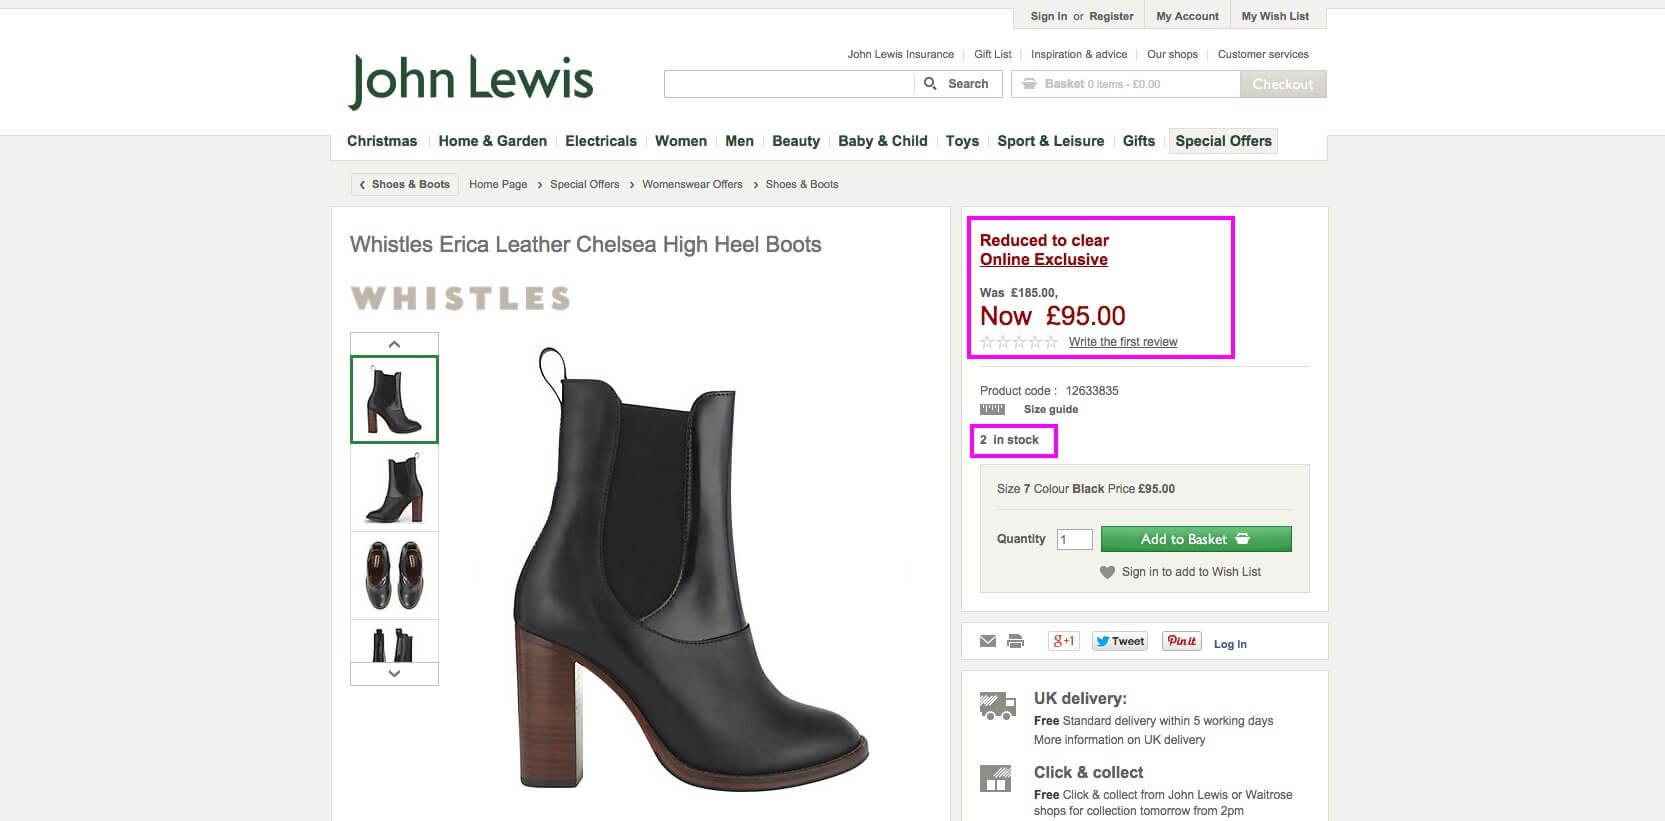 John Lewis using concept of Scarcity on checkout page